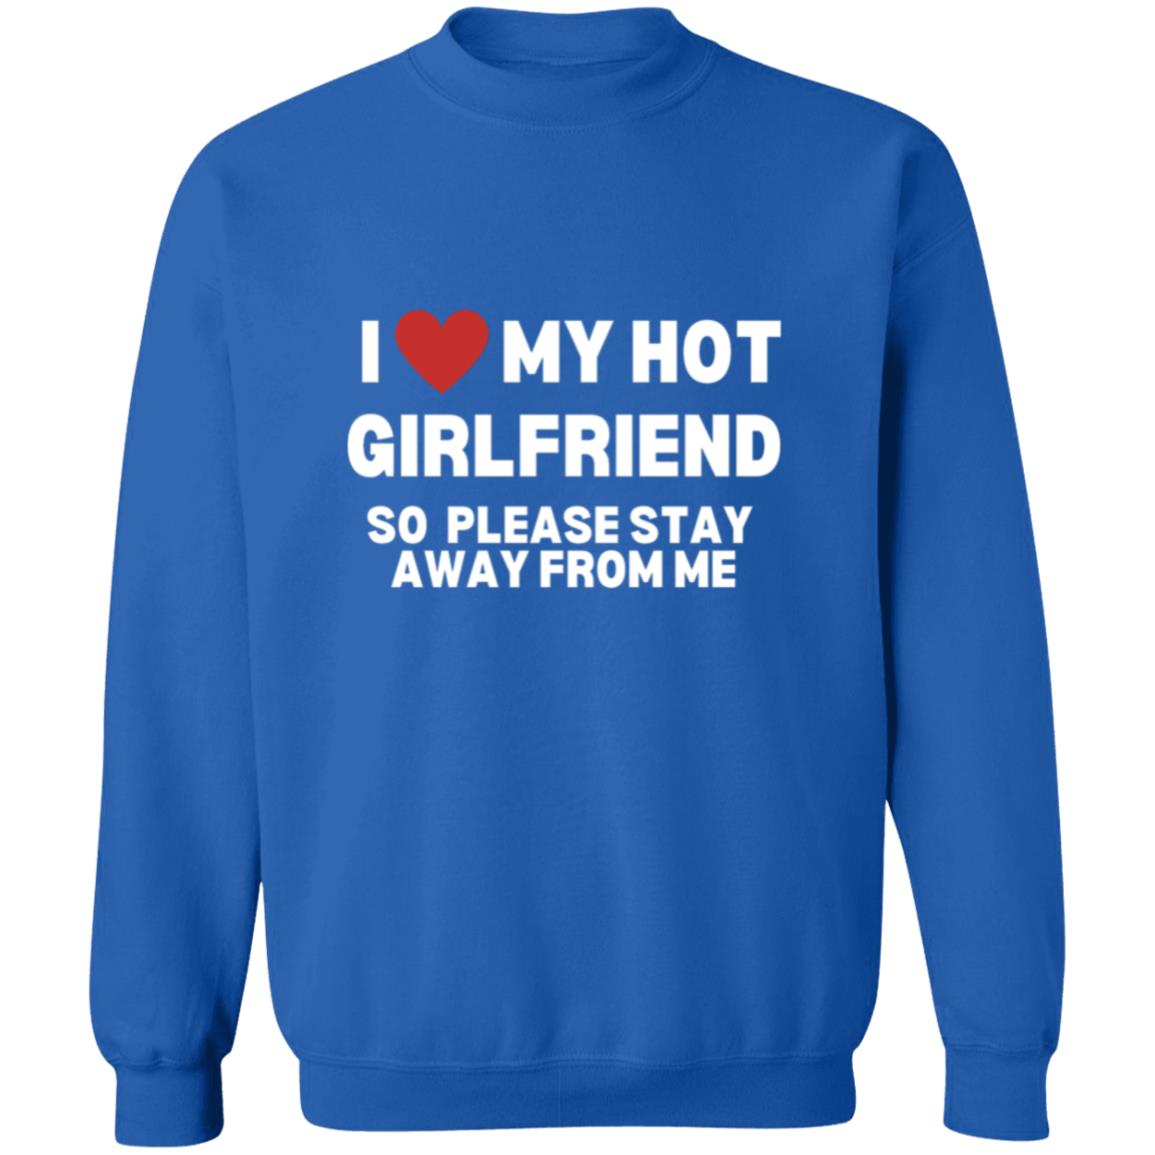 Get trendy with I Love My Hot Girlfriend  Pullover Crewneck Sweatshirt -  available at Good Gift Company. Grab yours for $28 today!